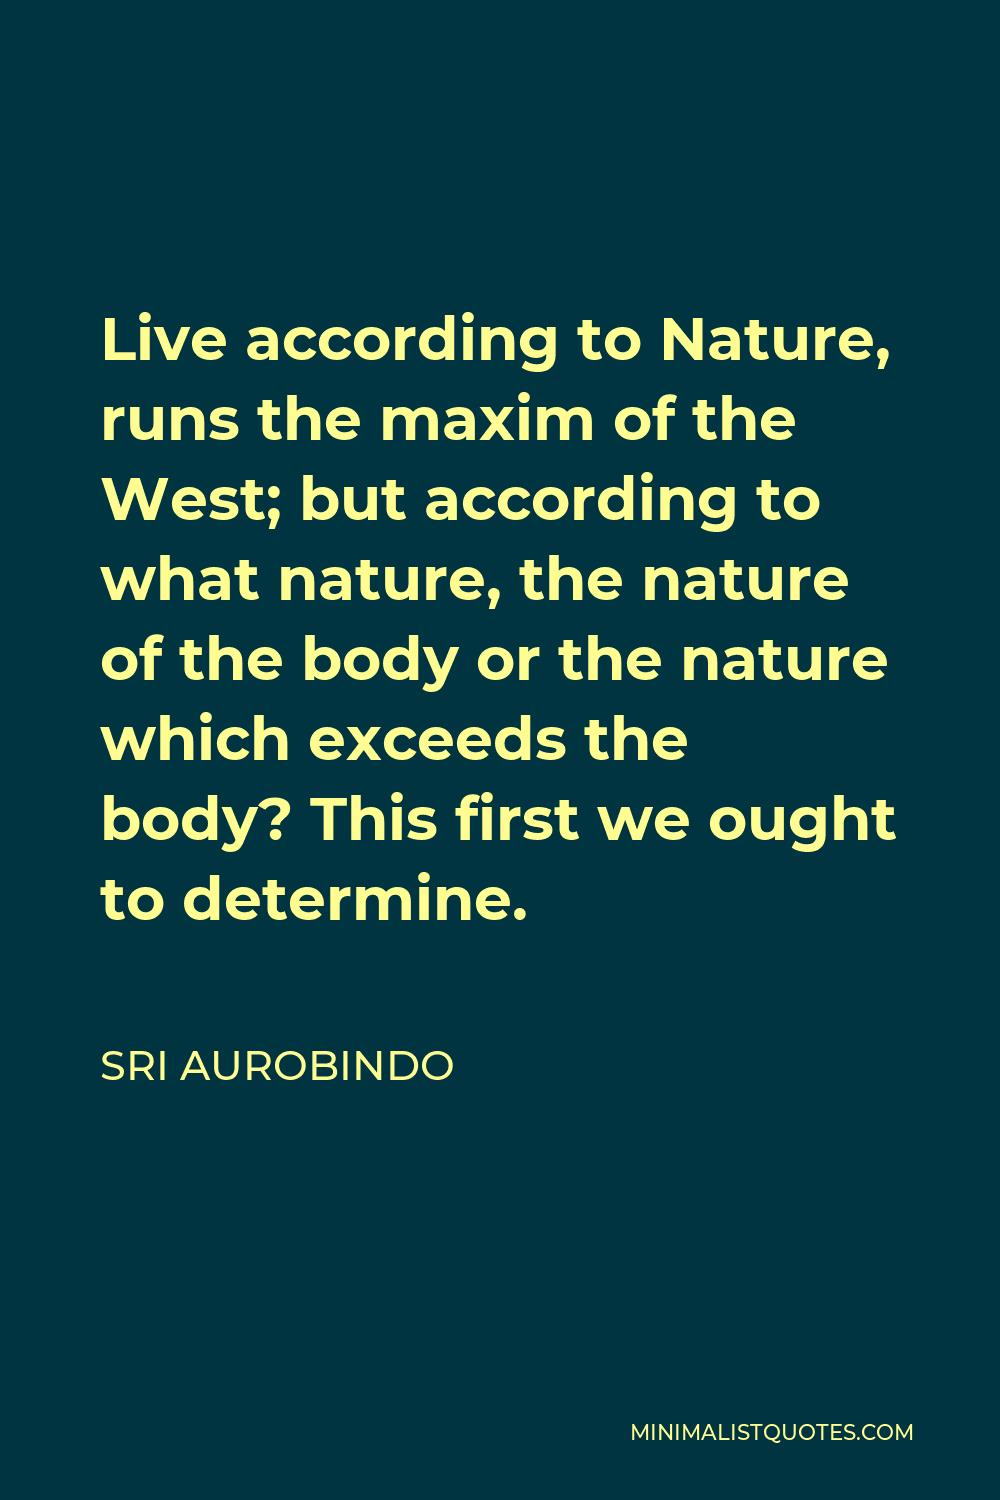 Sri Aurobindo Quote - Live according to Nature, runs the maxim of the West; but according to what nature, the nature of the body or the nature which exceeds the body? This first we ought to determine.